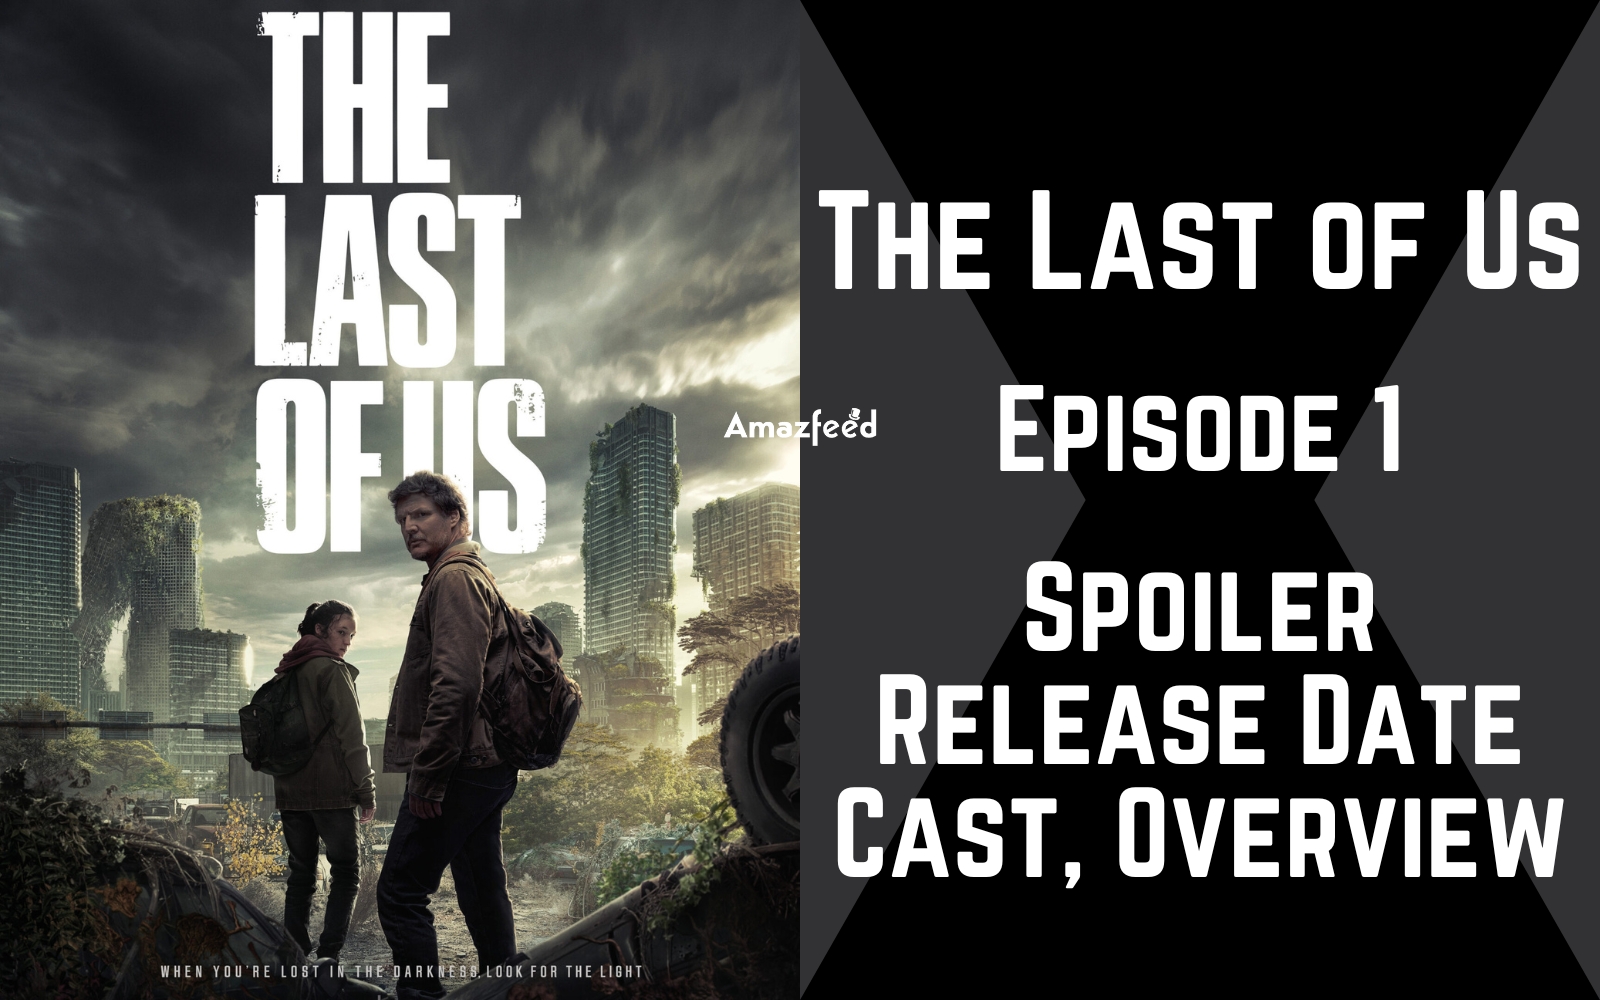 The Last of Us Episode 4 Release Date, Spoiler, Cast, Trailer & Overview »  Amazfeed